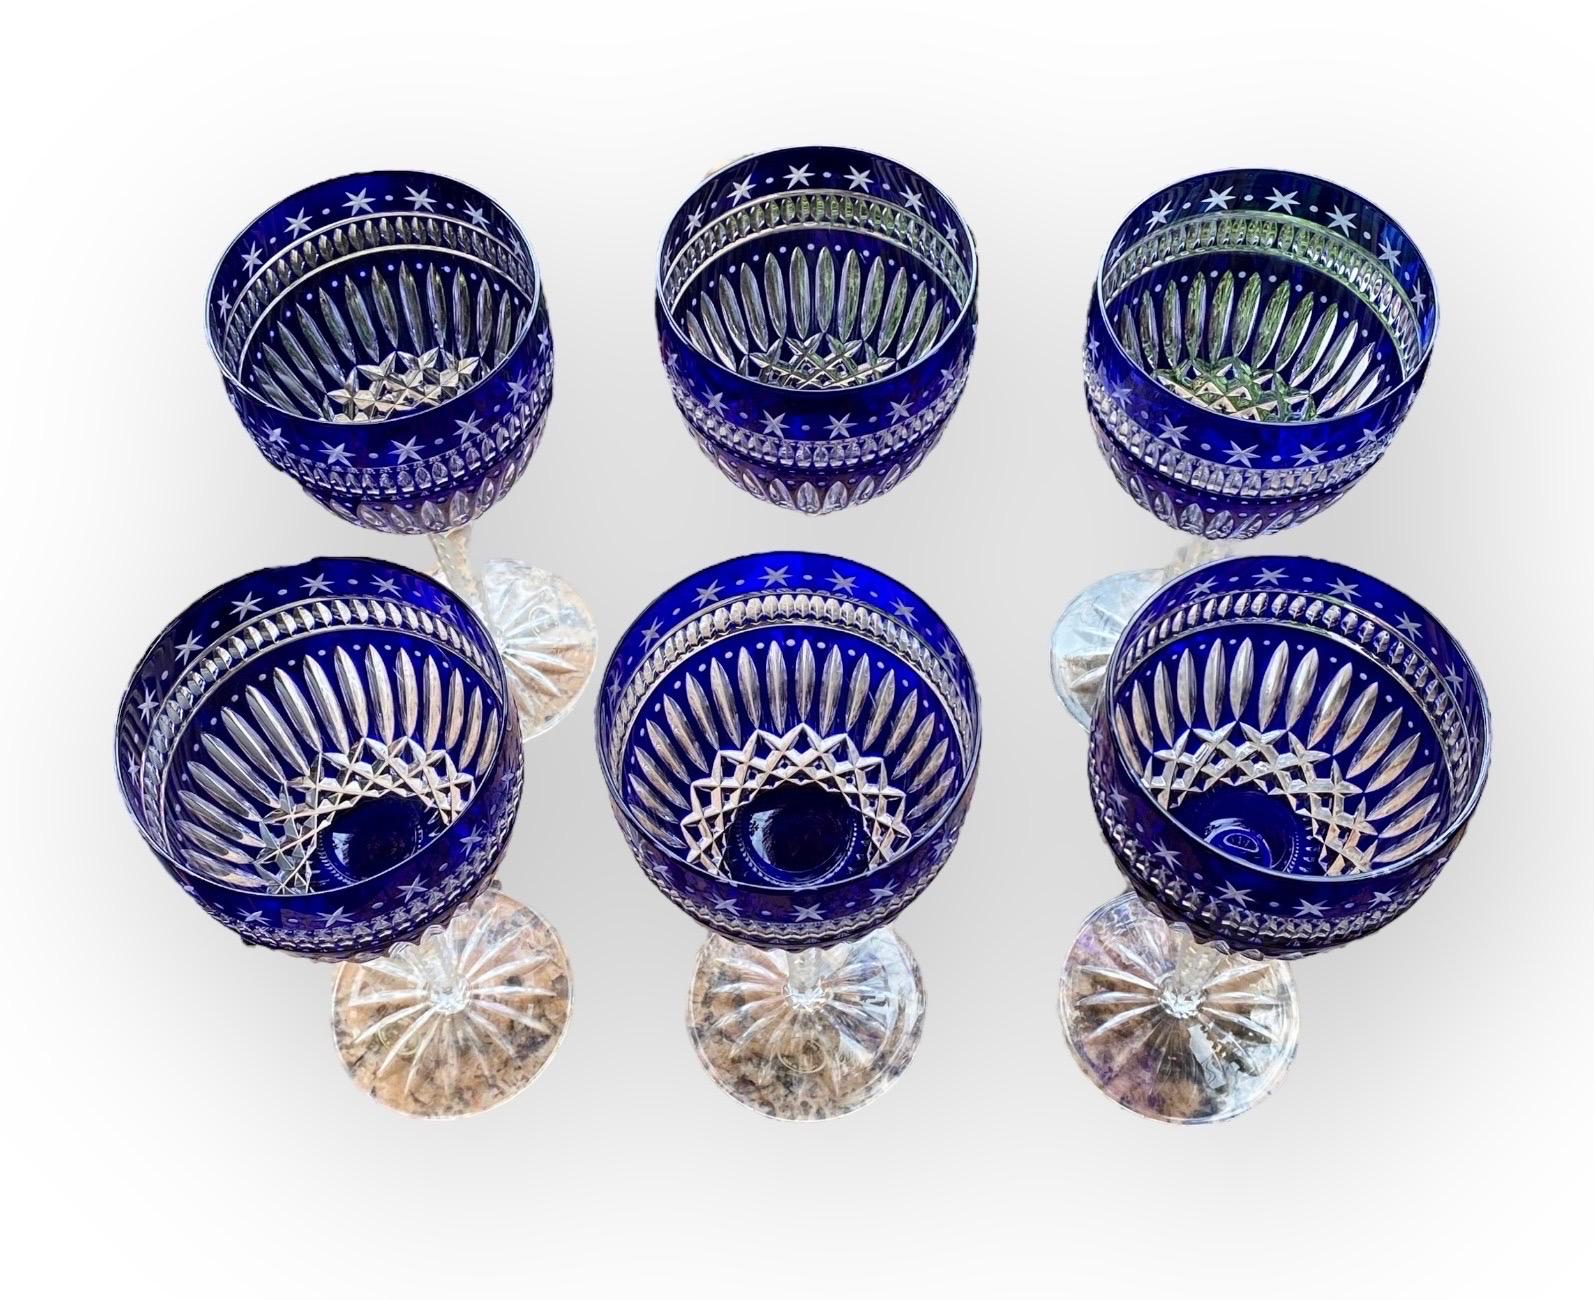 Crystal Six Ajka Serenity Star Cobalt Blue Cut To Clear Water Goblets Wine Glasses For Sale